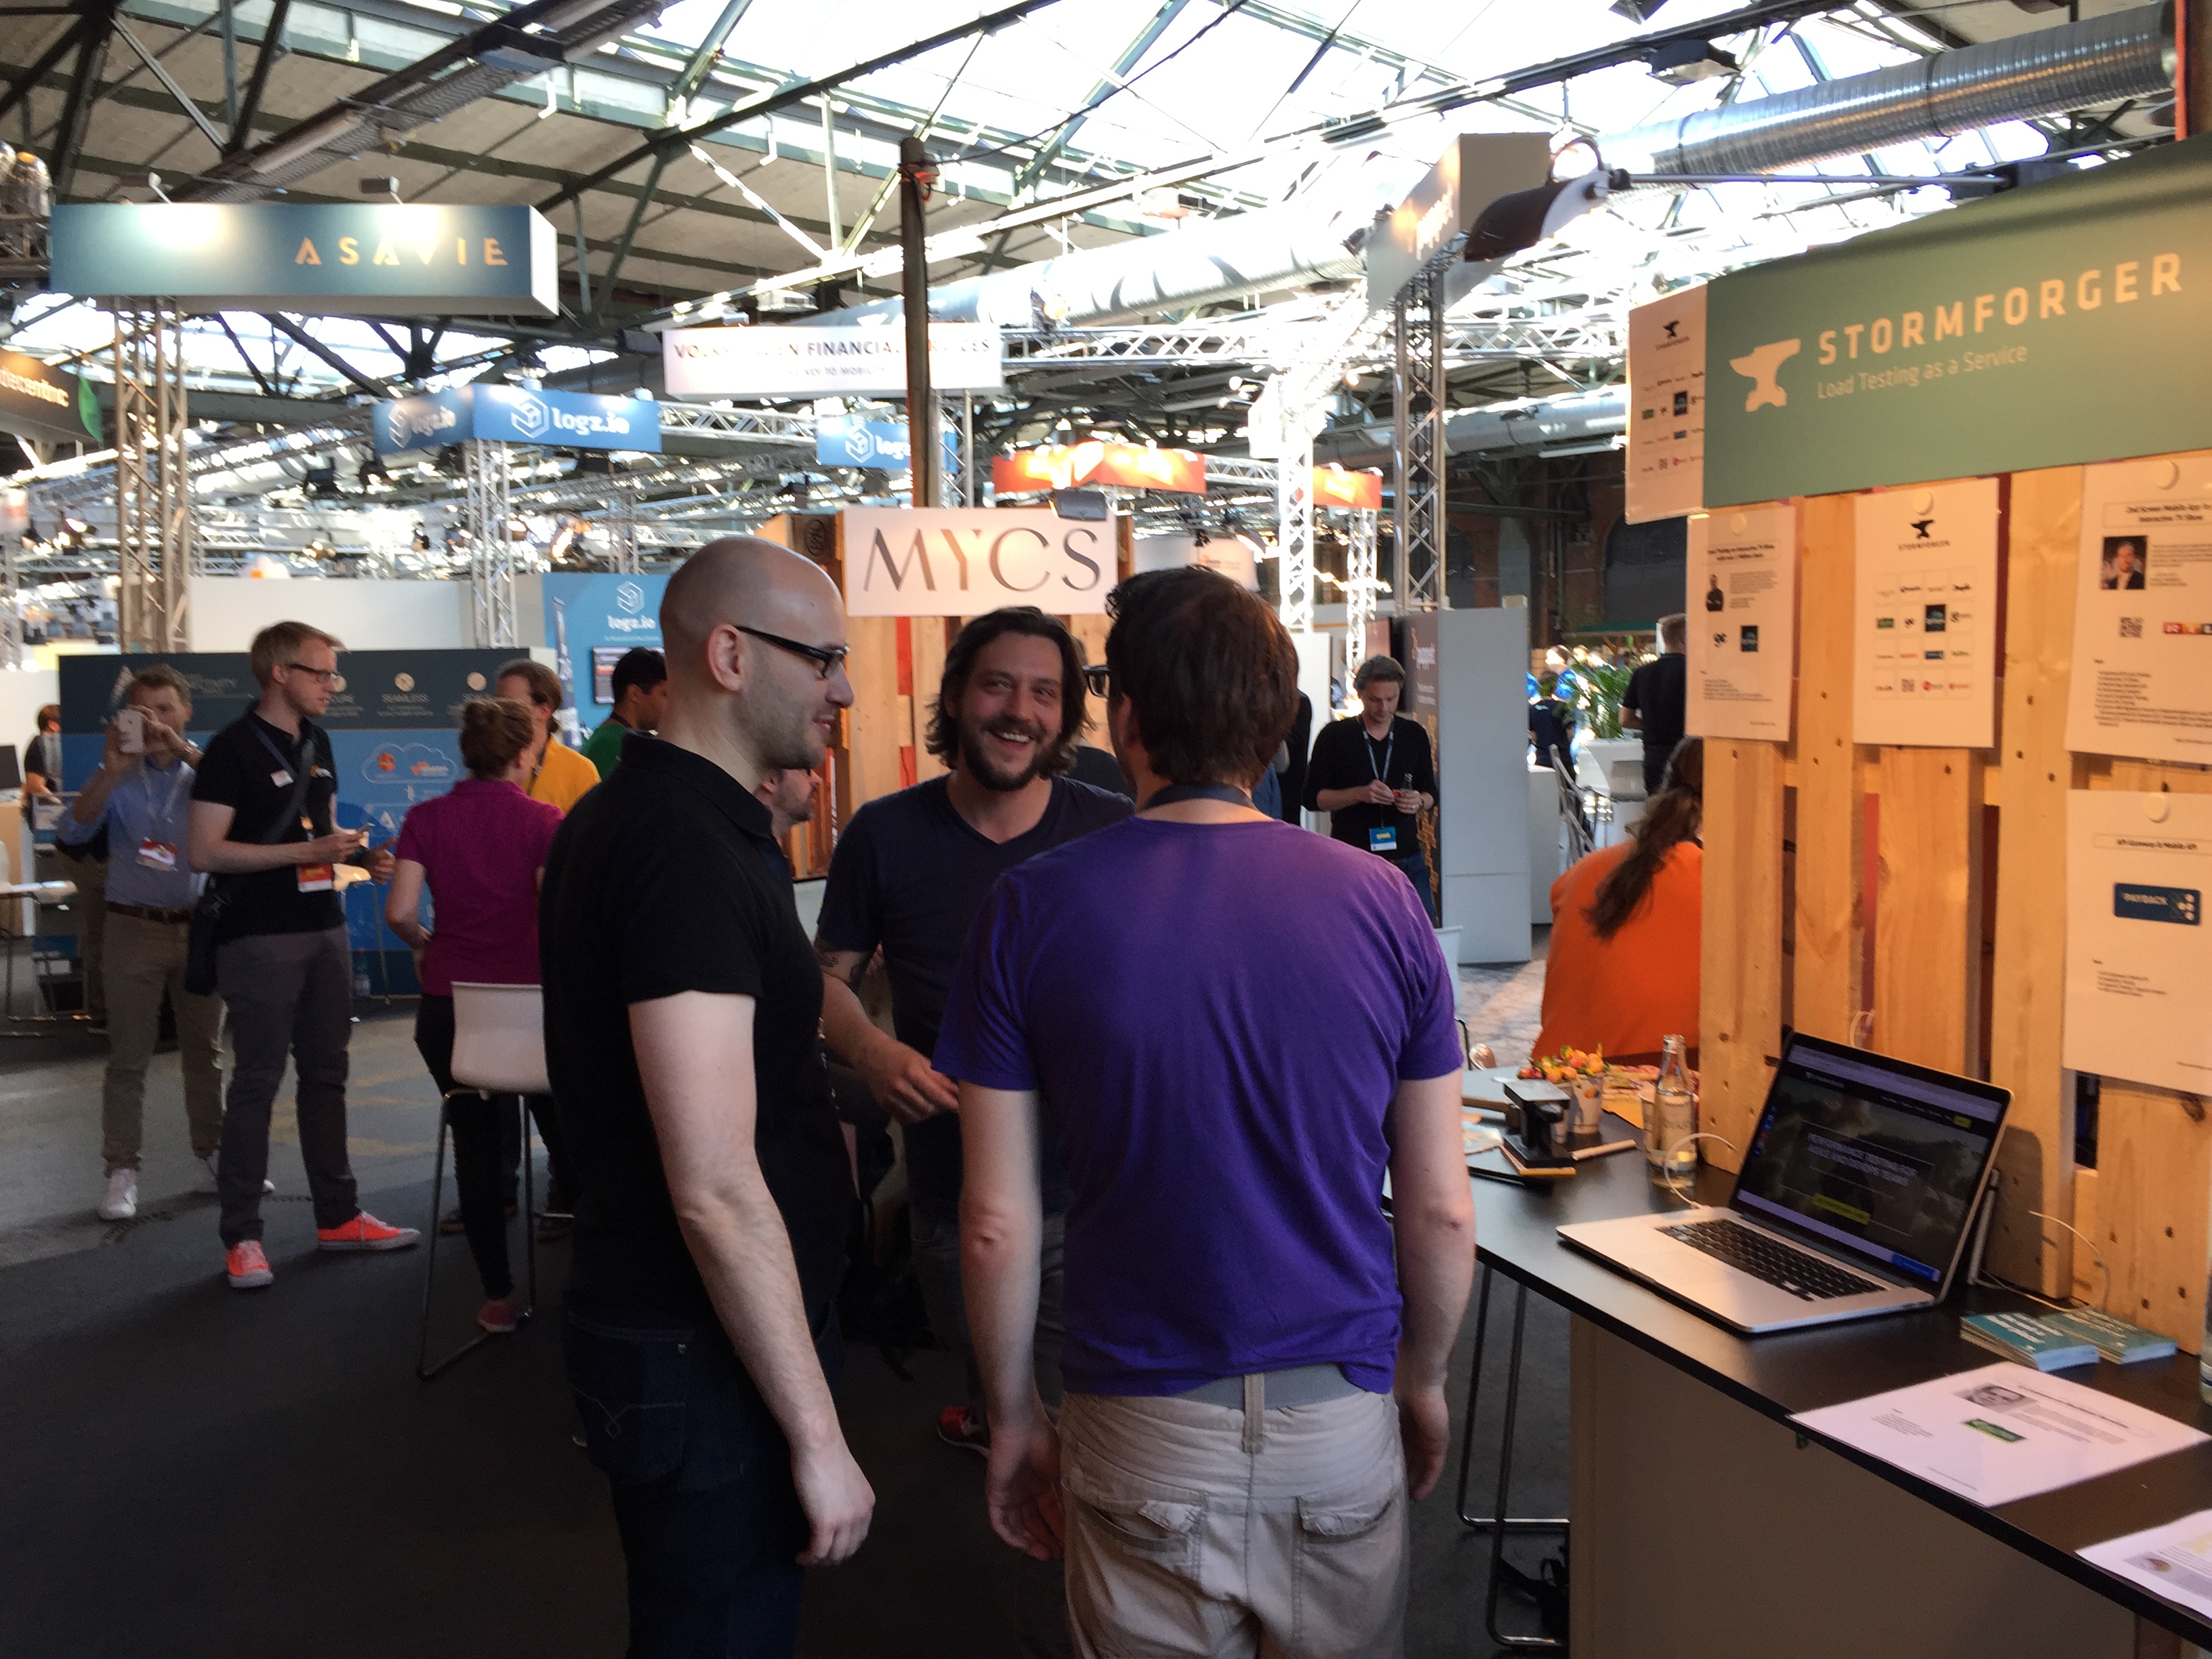 Impressions from the AWS Summit Berlin 2017 | StormForger